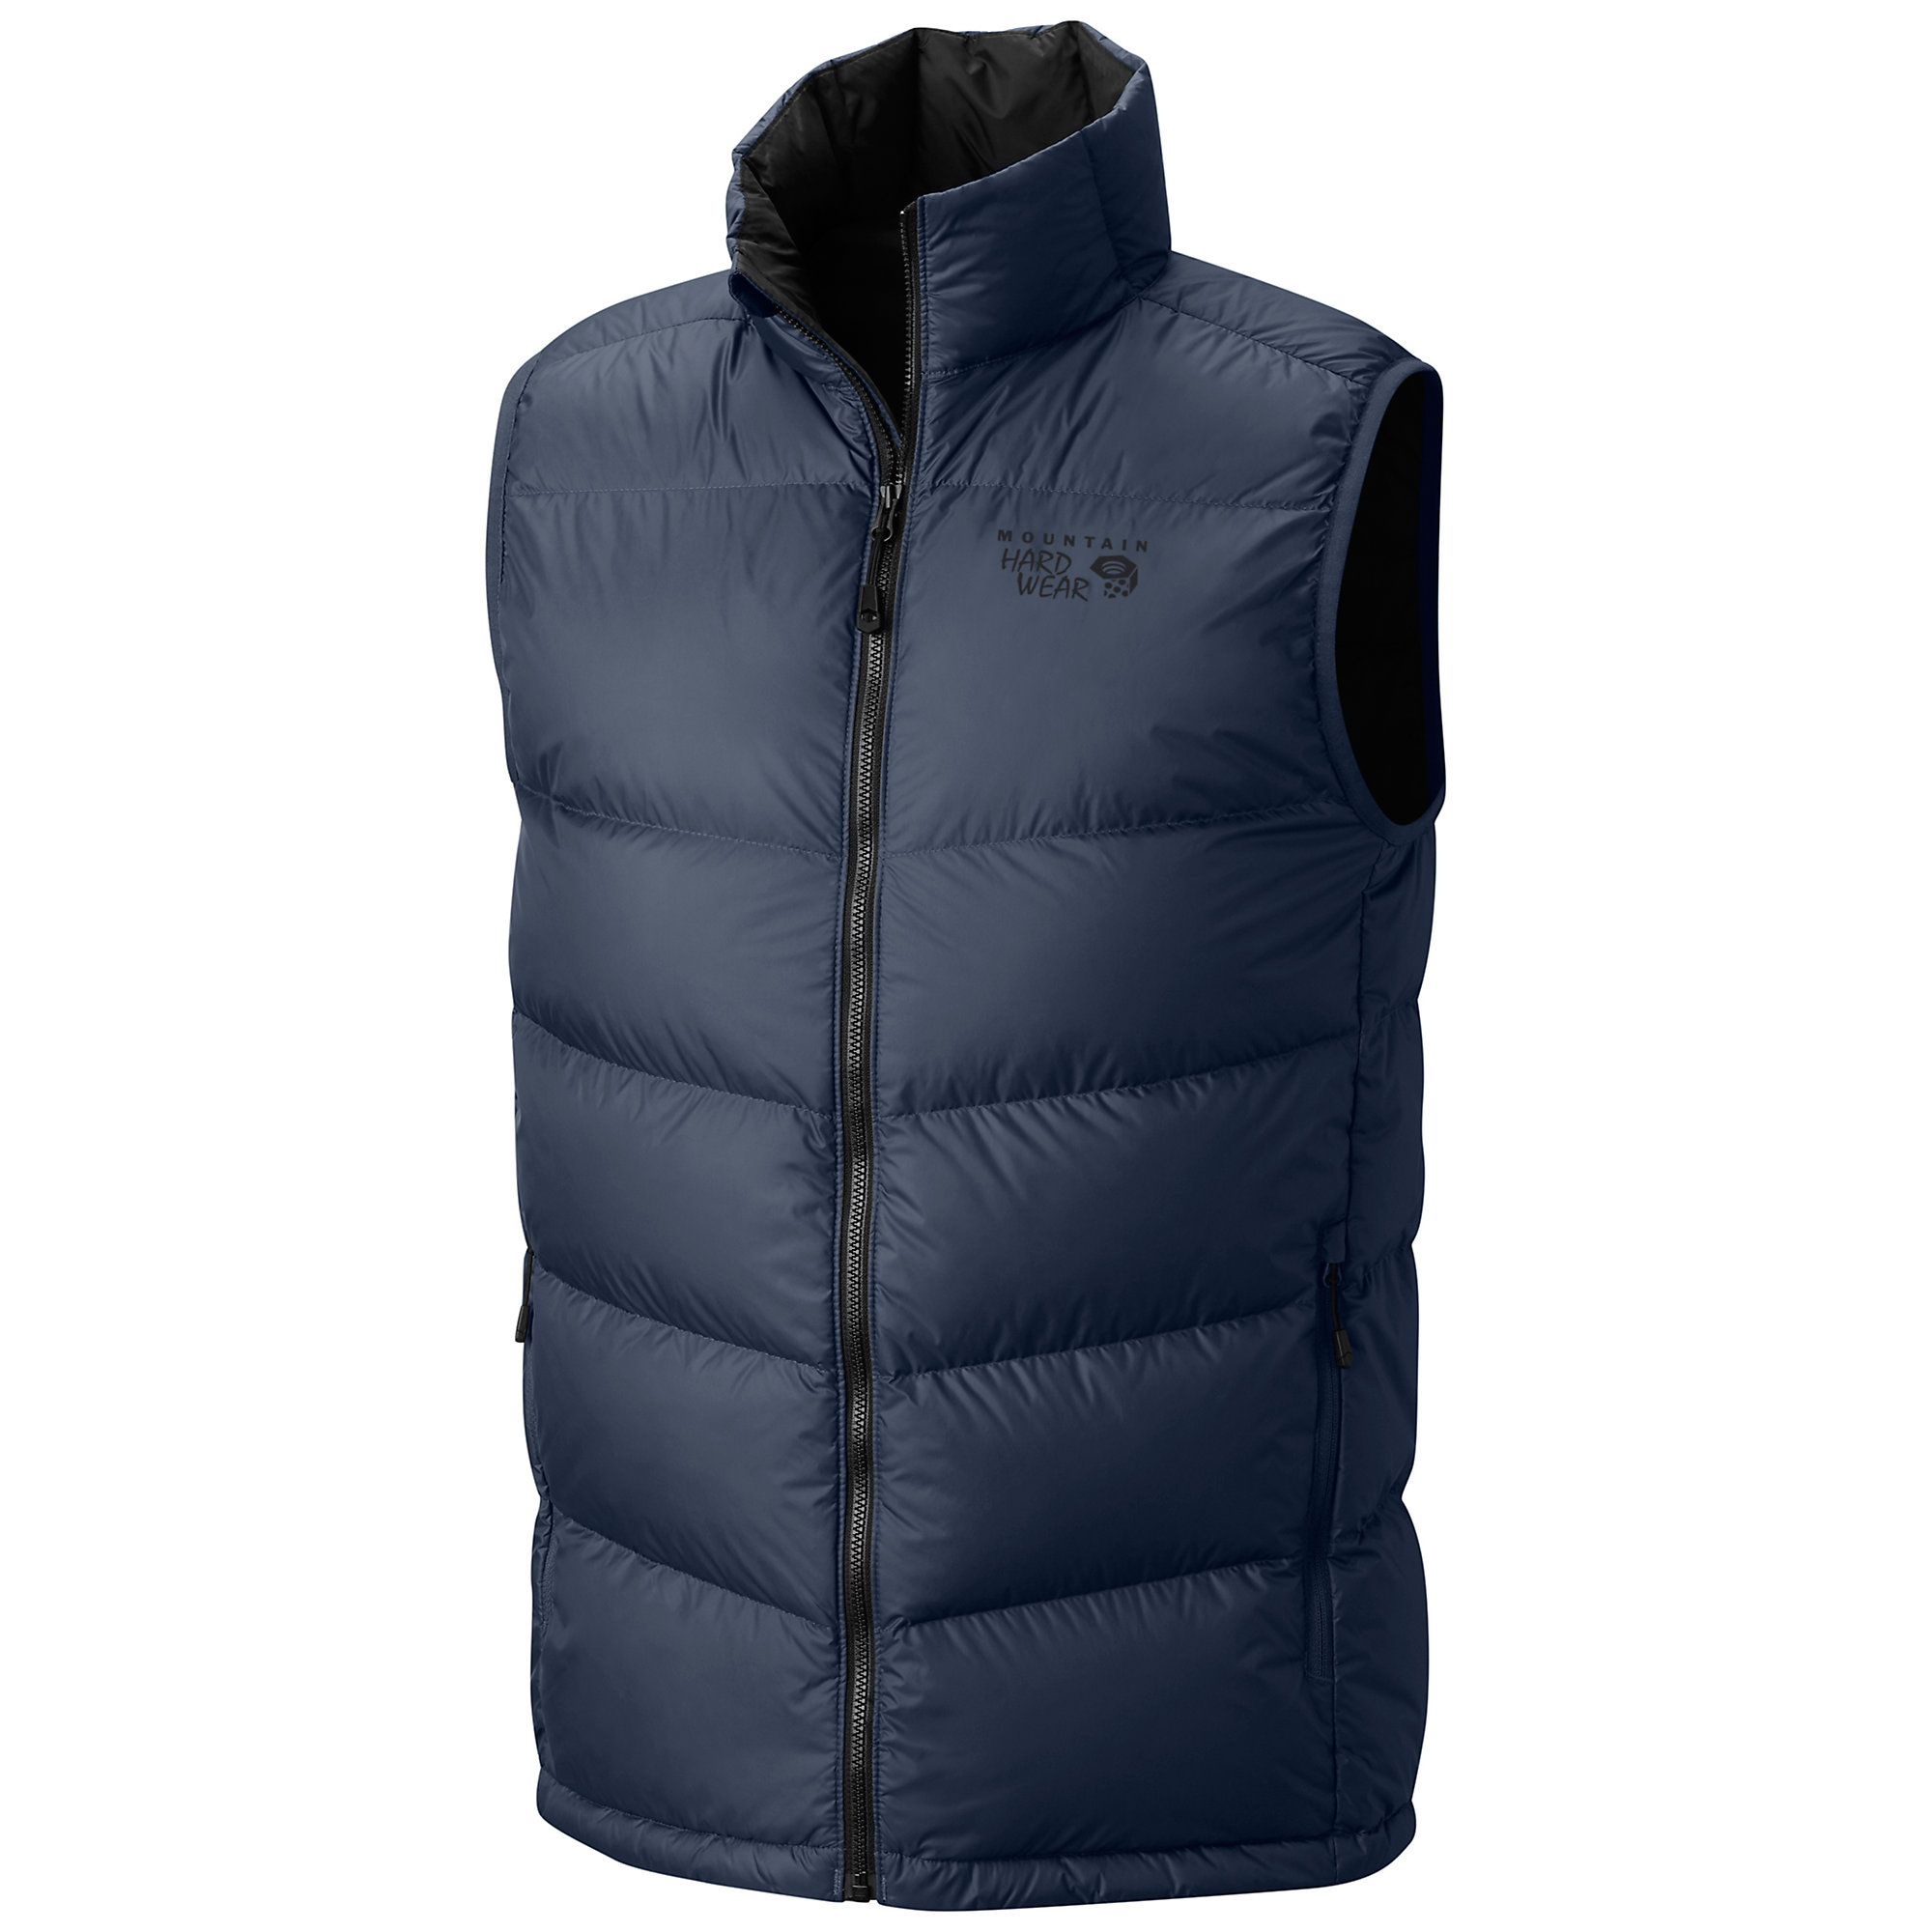 The Best Down Insulated Vests for 2019 - Trailspace